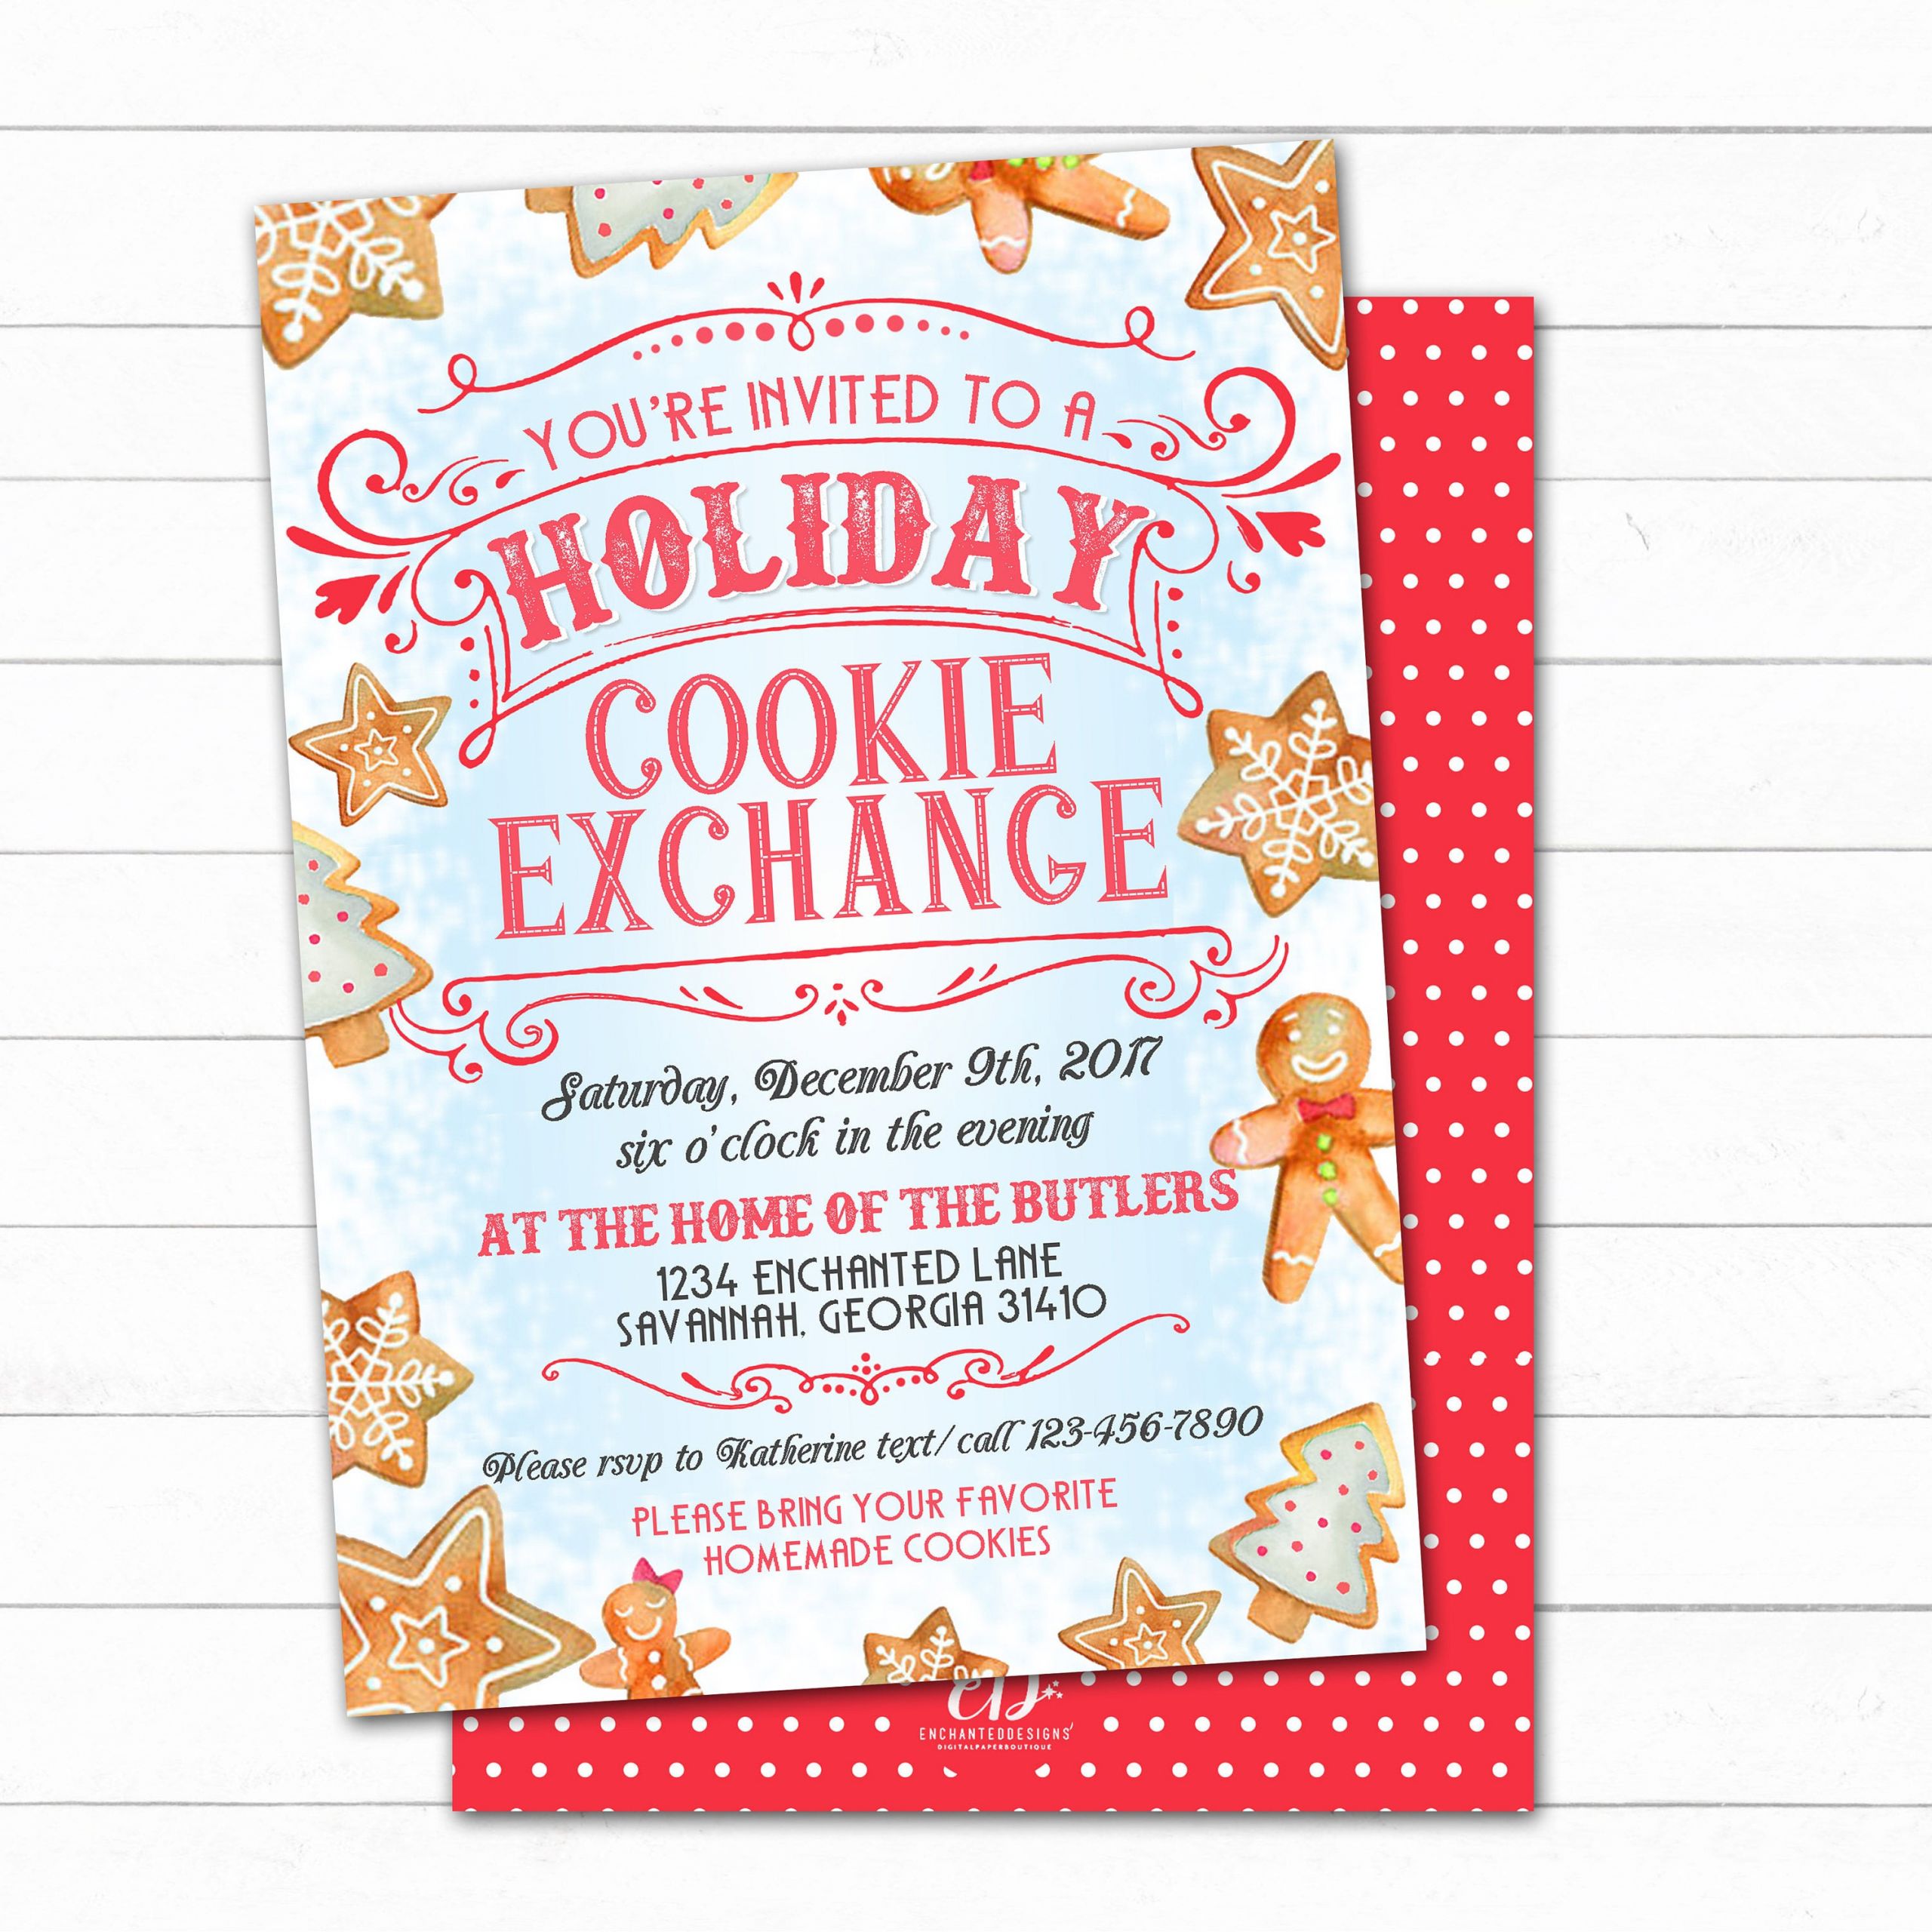 Christmas Cookie Exchange Party Ideas
 Cookie Exchange Invitation Cookie Swap Invite Christmas